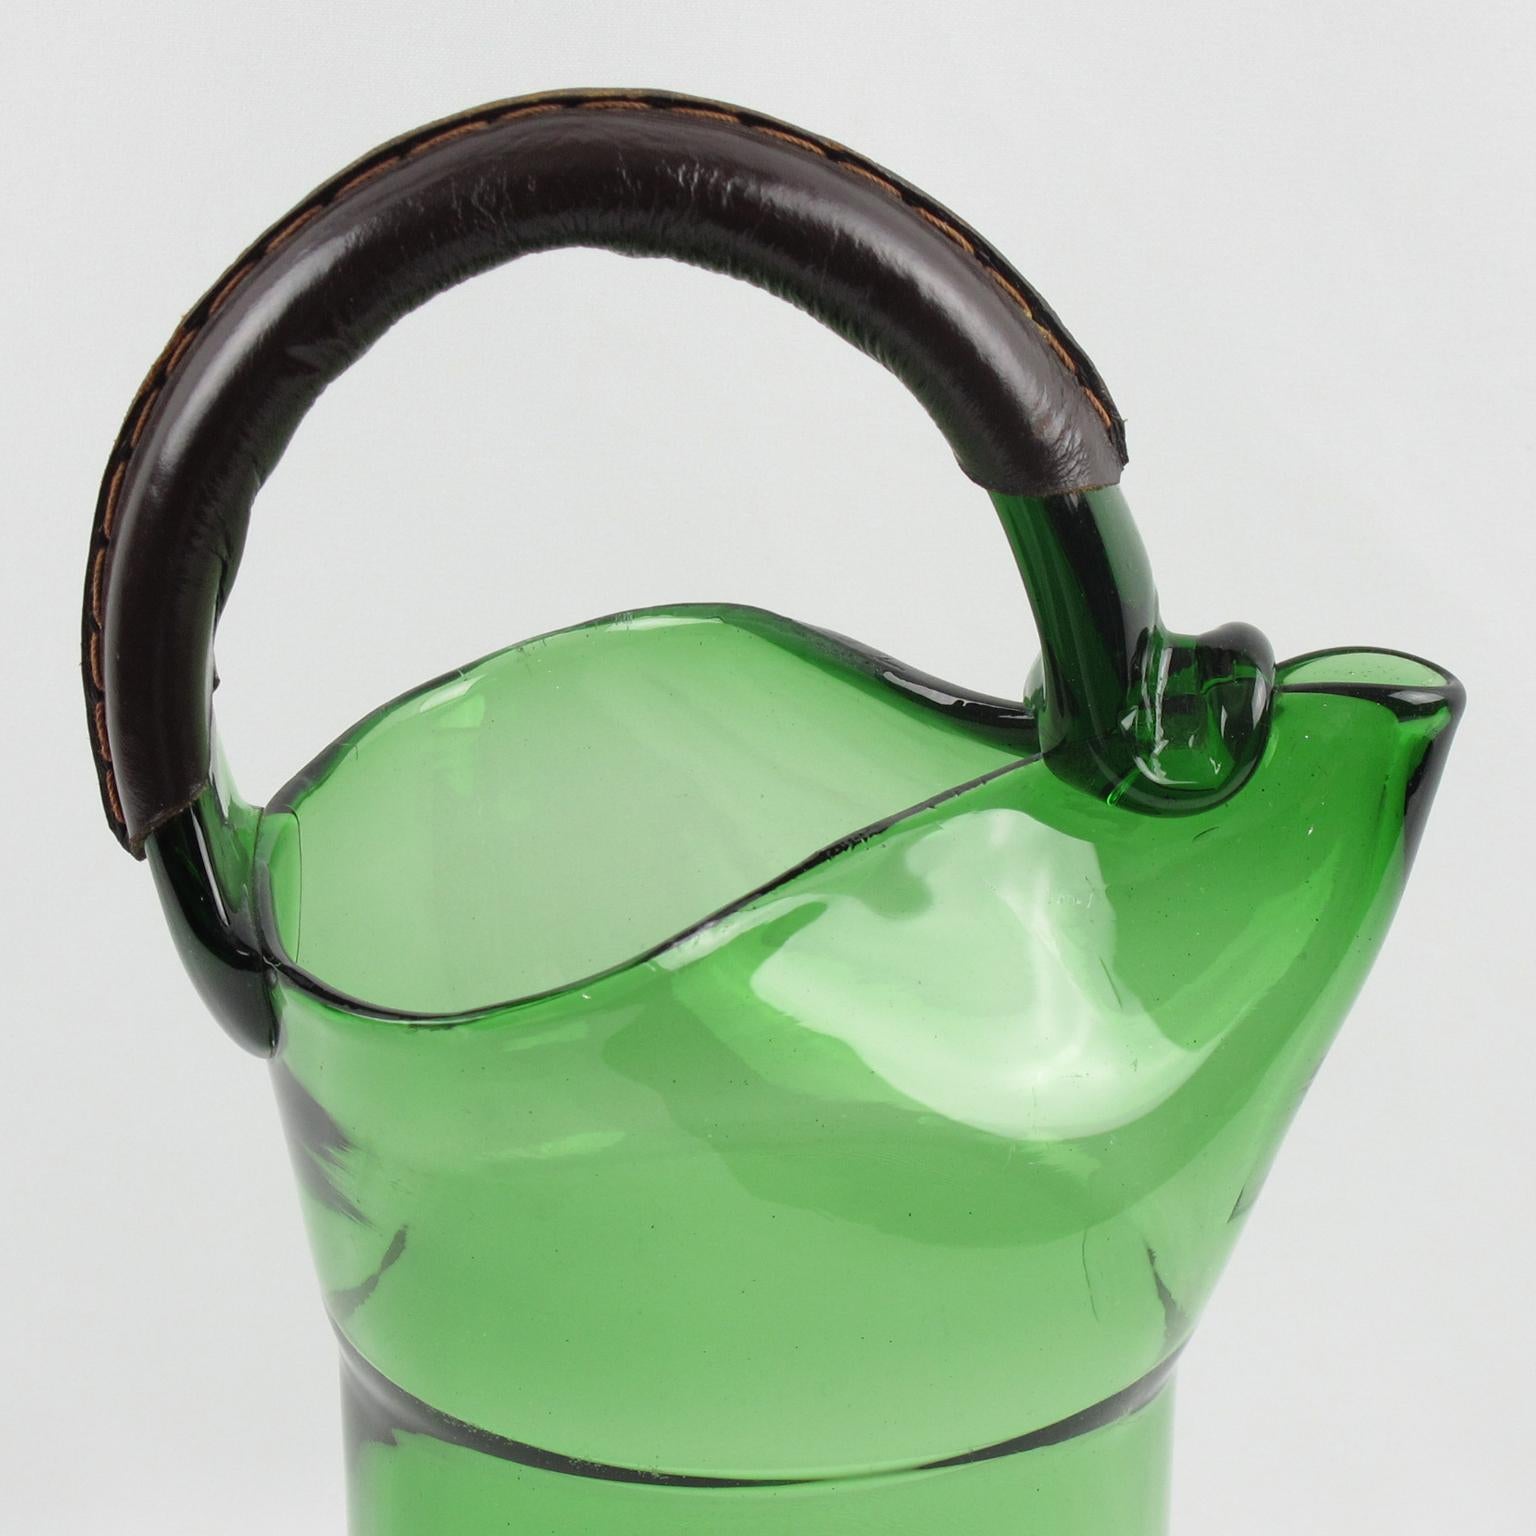 1960s Italian Mouth-Blown Glass Barware Pitcher Hand-Stitched Leather Handle 3